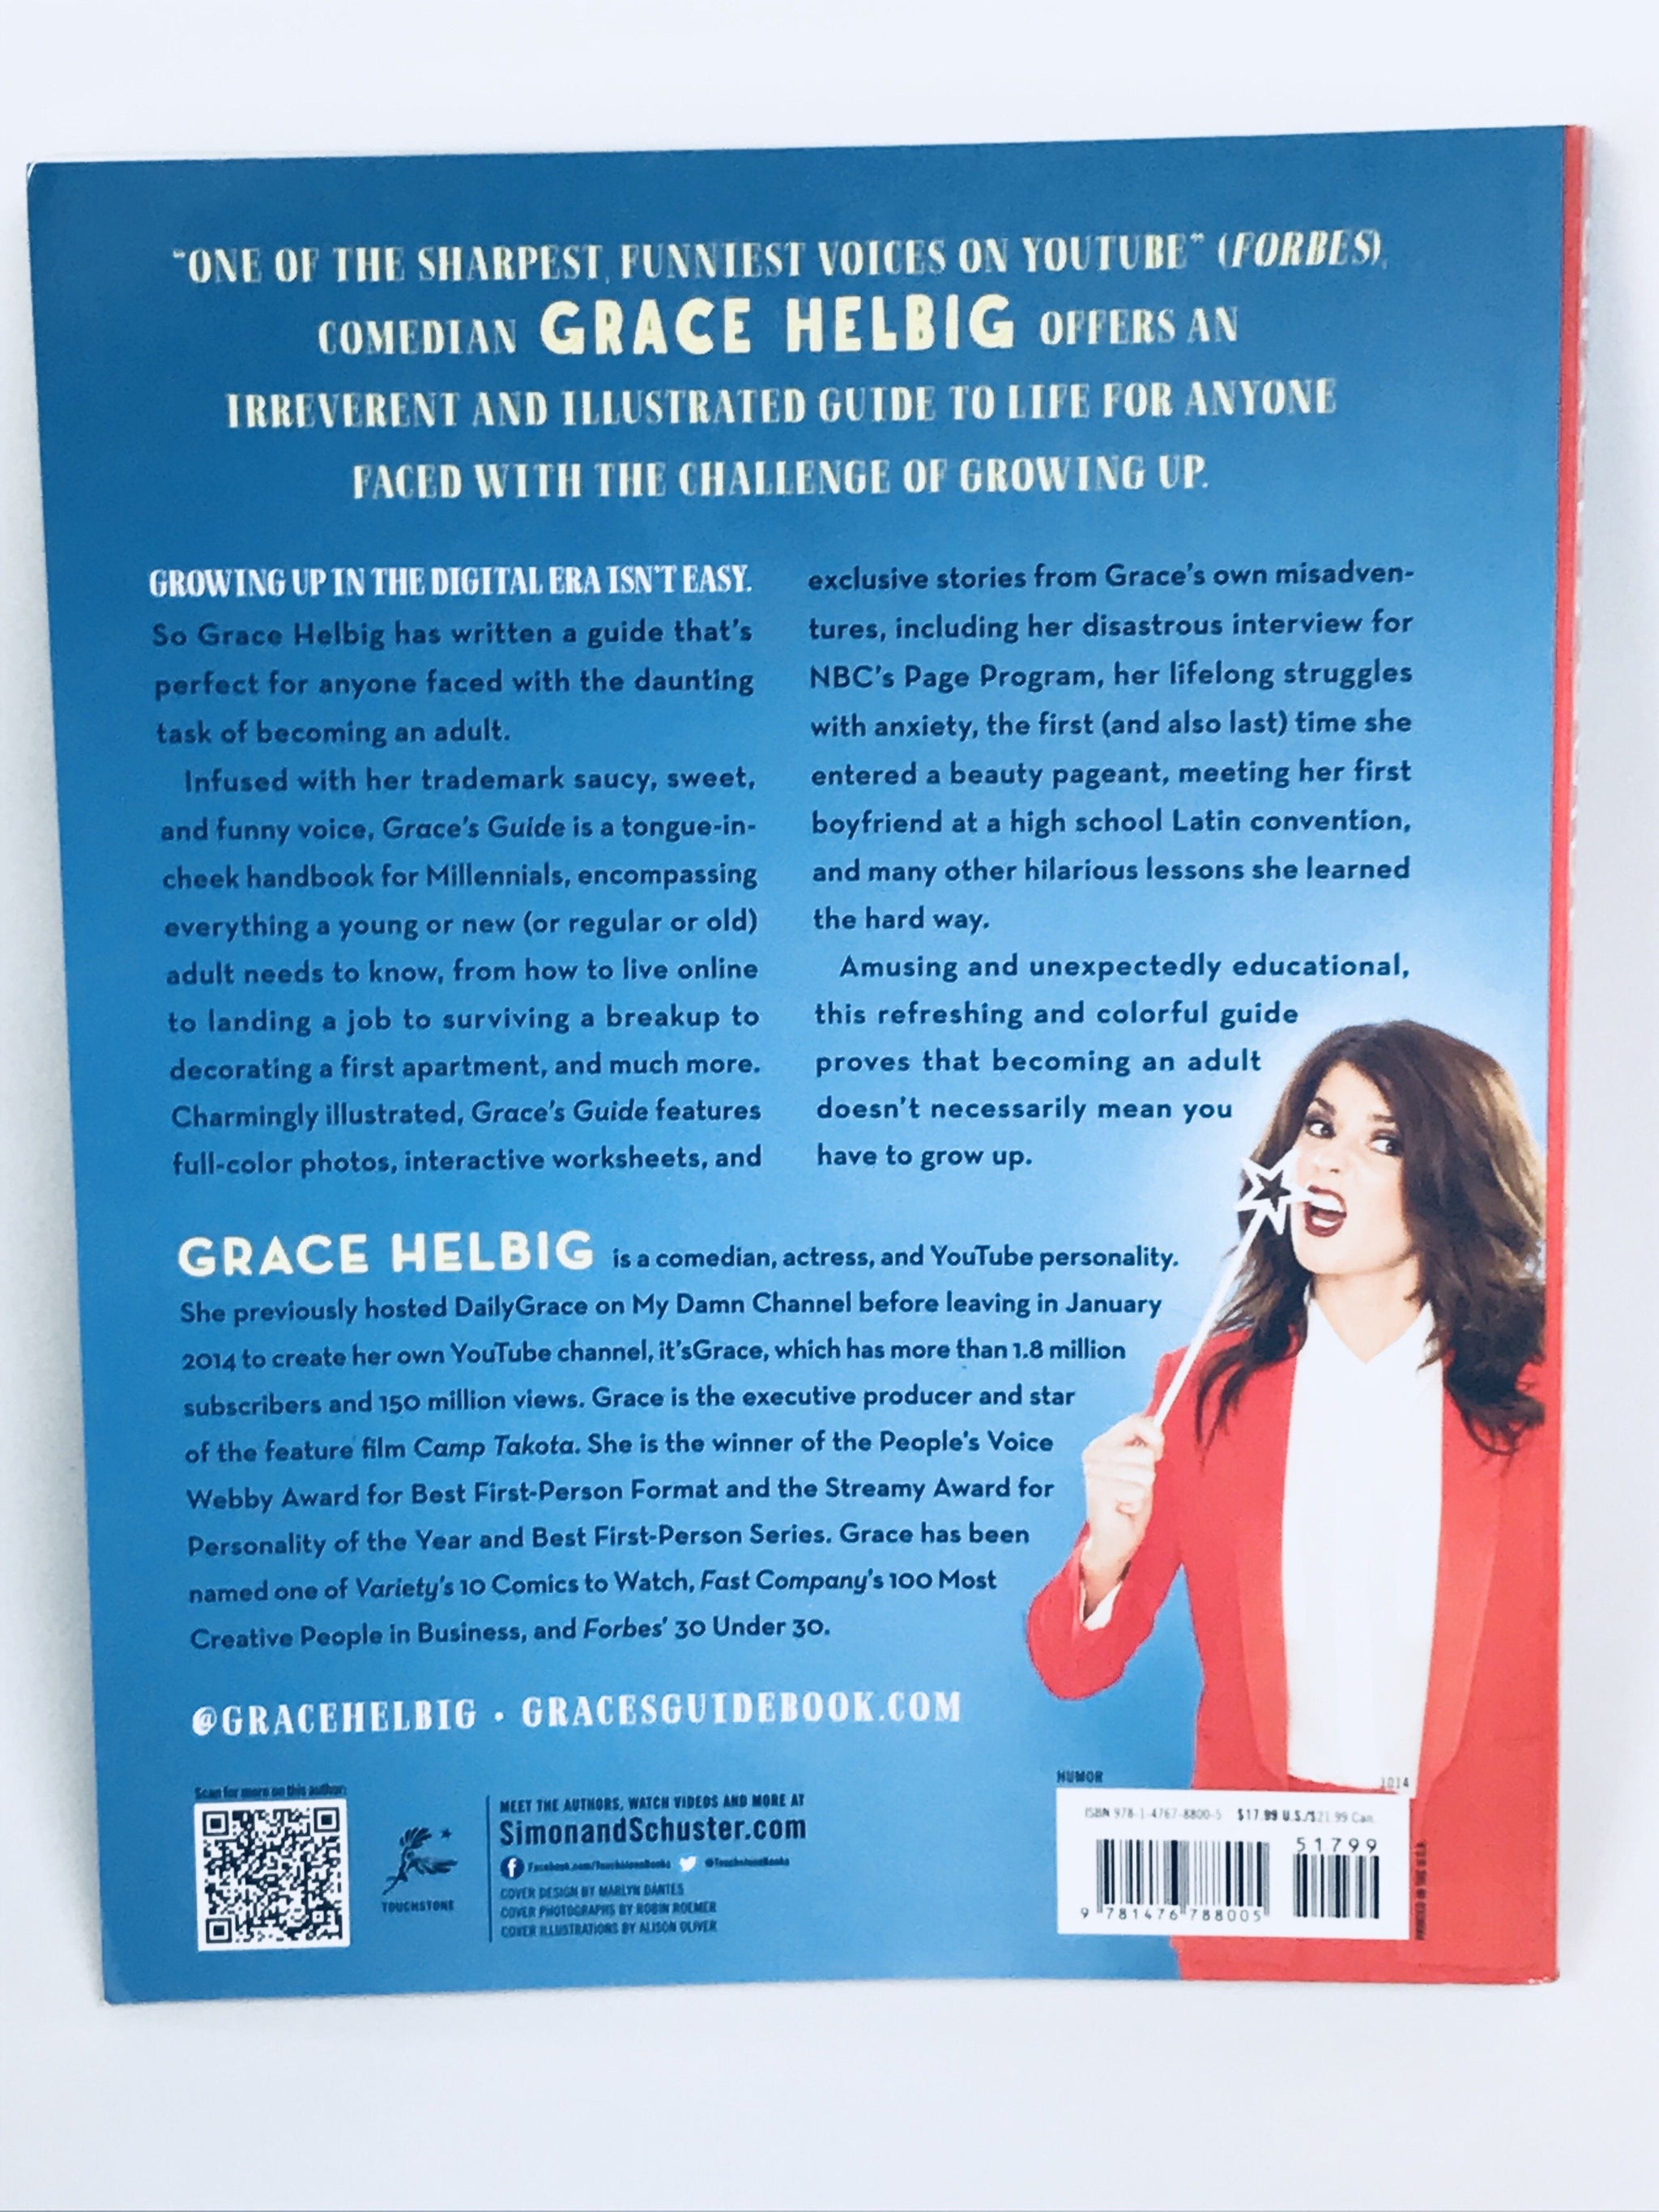 Grace's Guide: The Art of Pretending to Be a Grown-Up – Everyday Faith